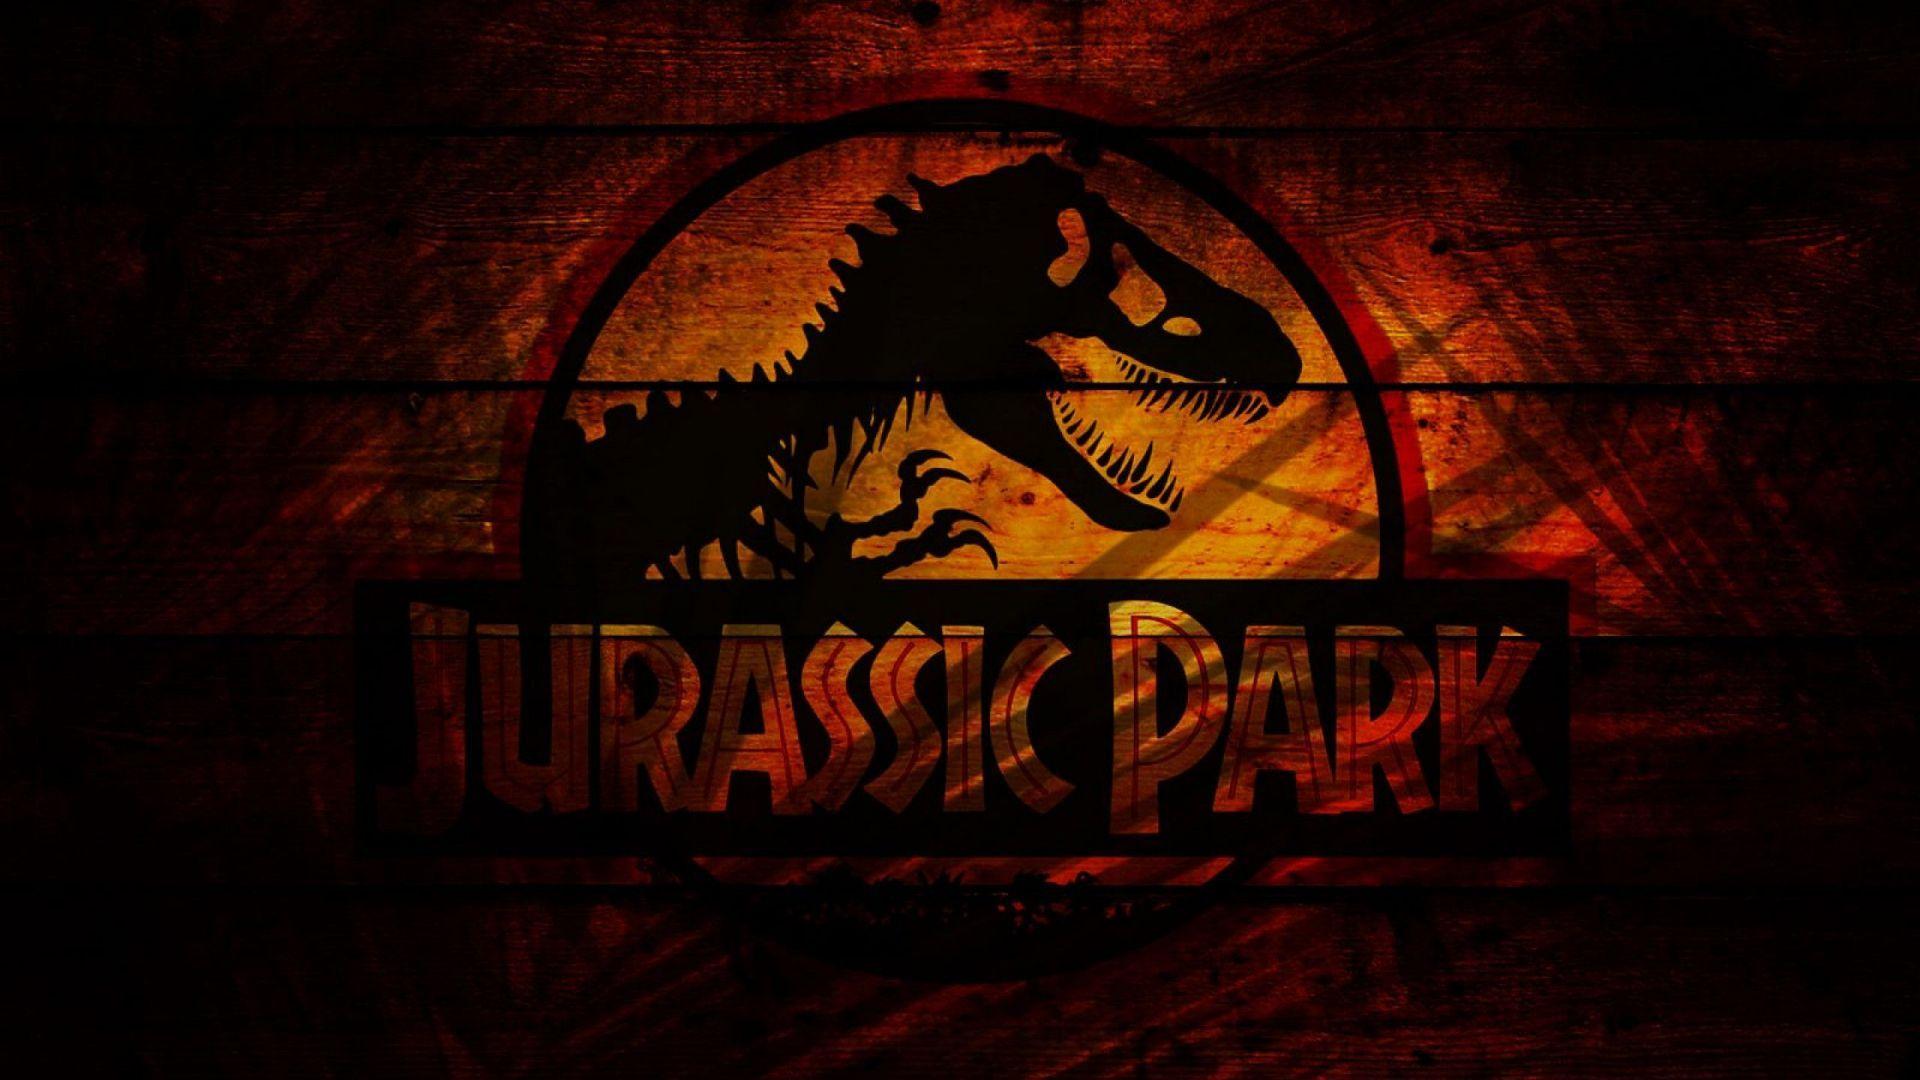 Jurassic Park 2 Wallpapers - Top Free Jurassic Park 2 Backgrounds